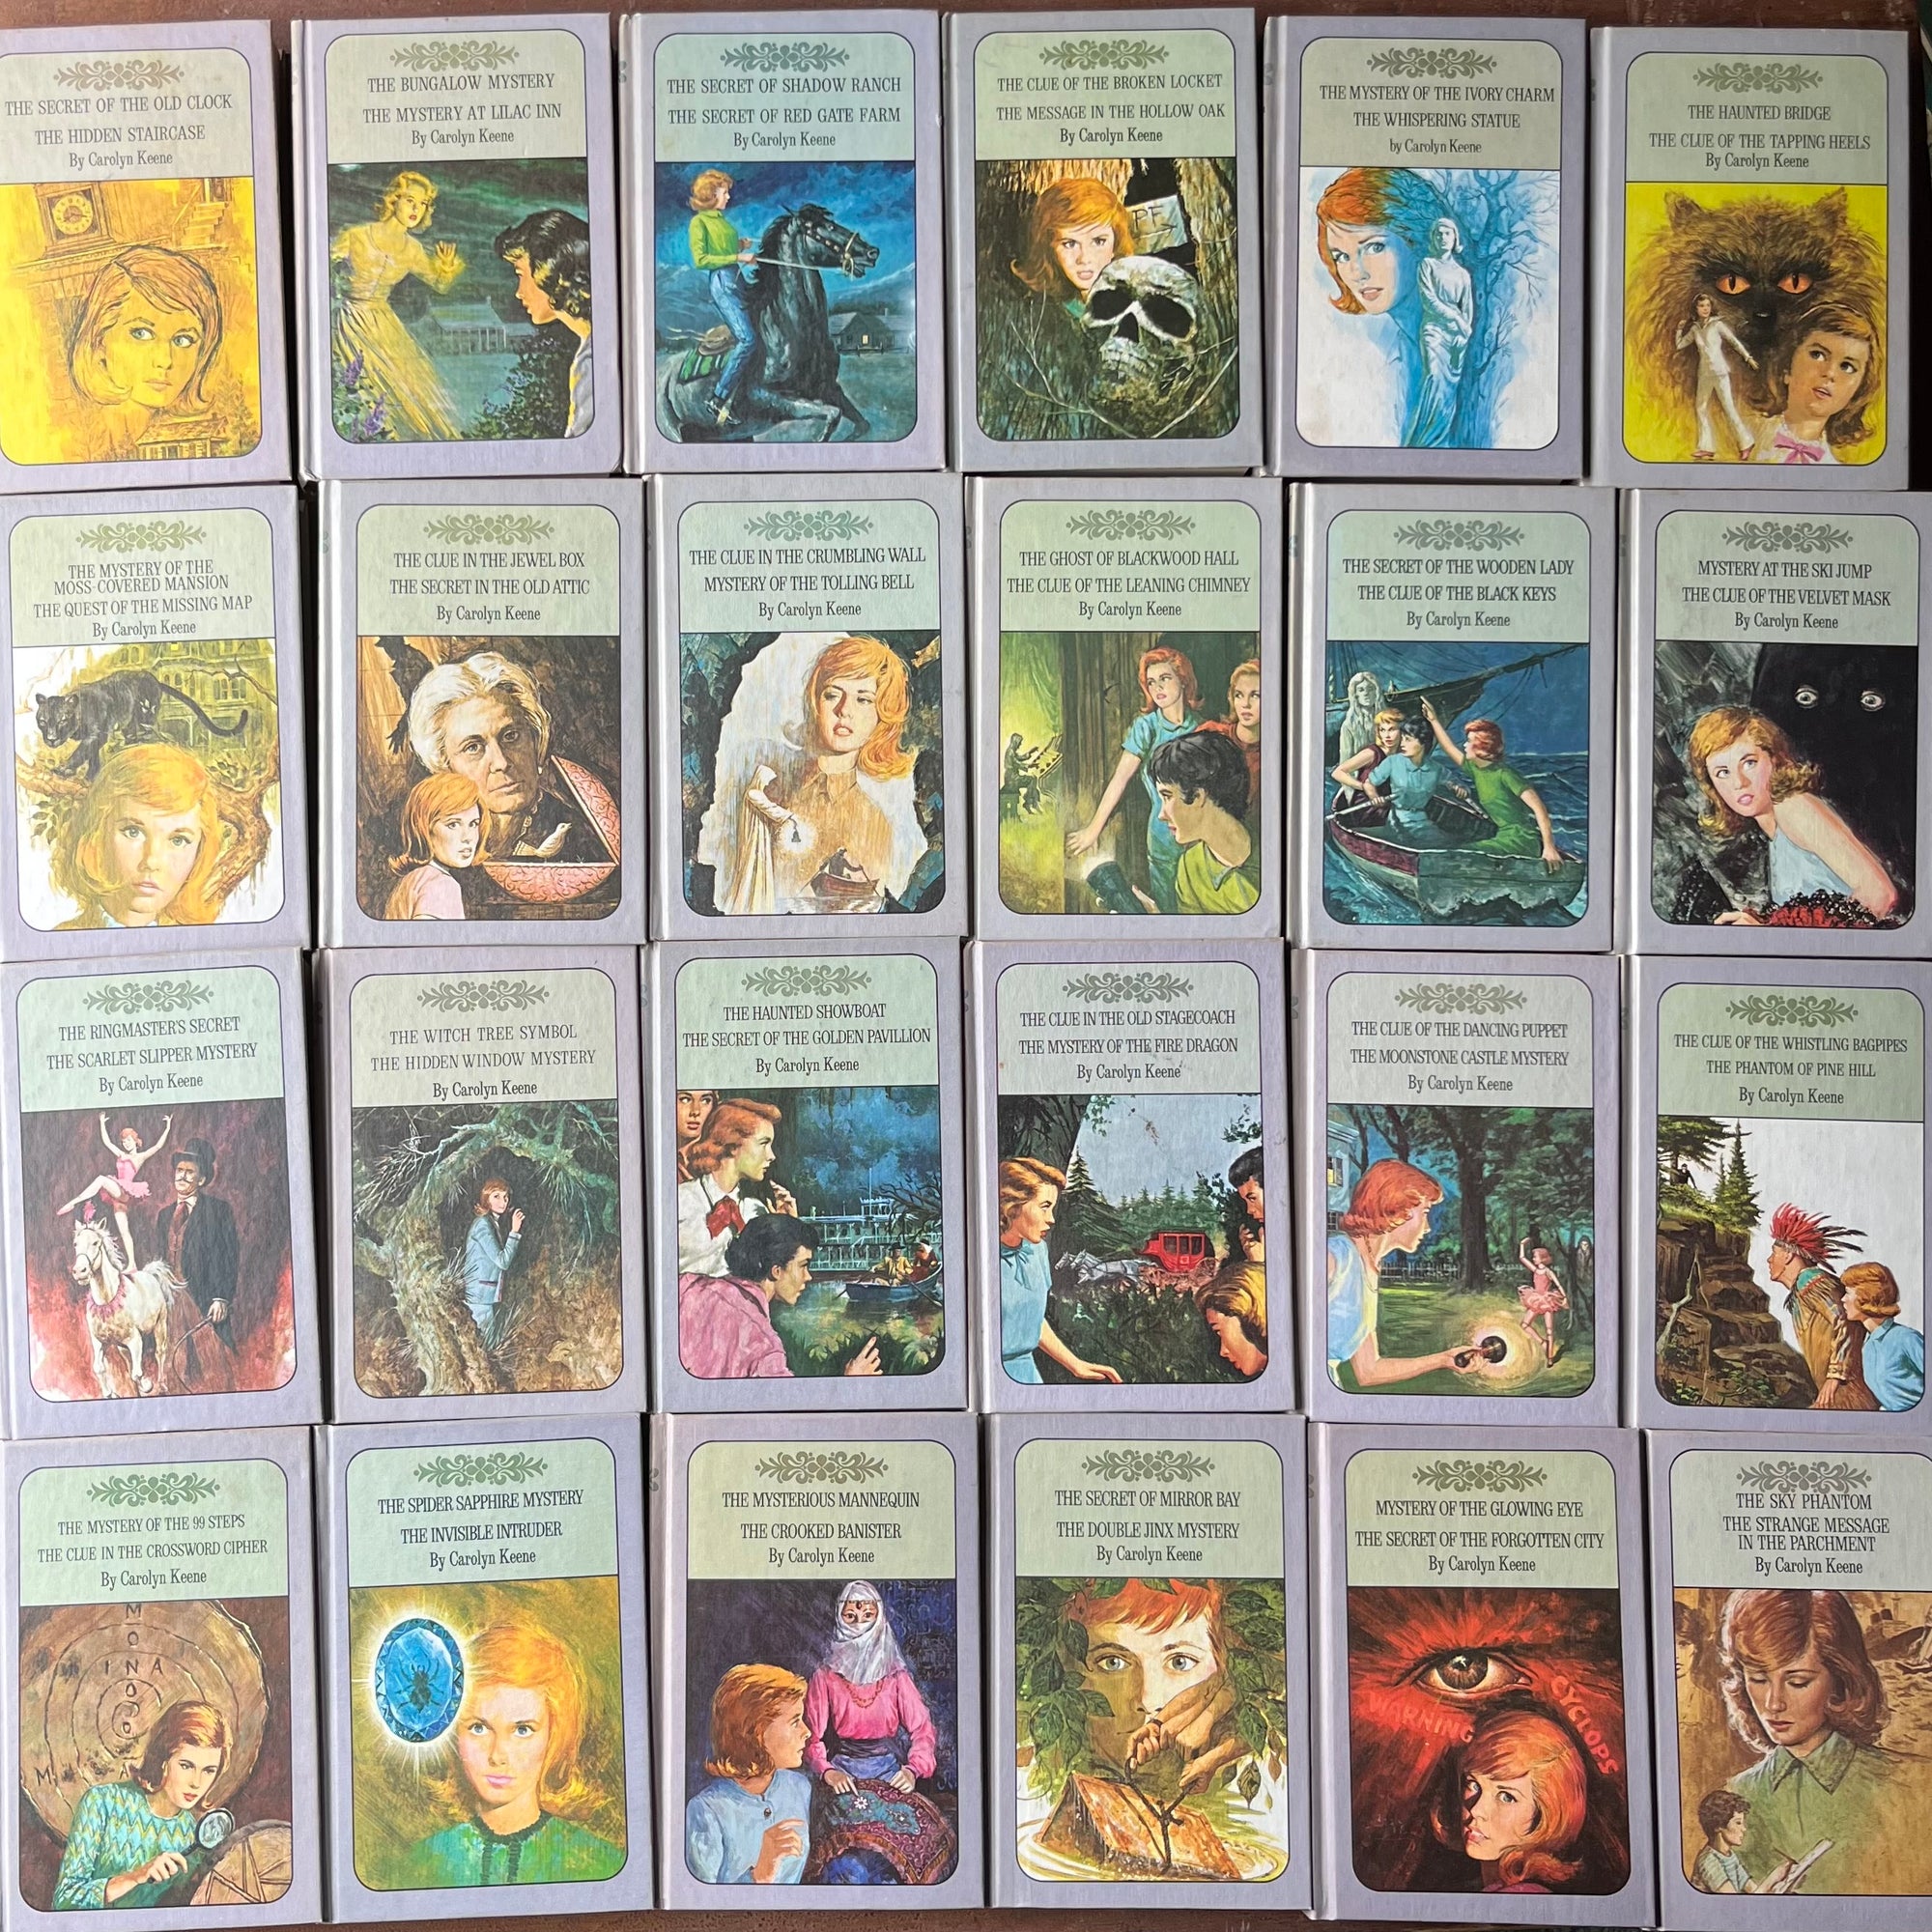 Nancy Drew Twin Thrillers Book Set of 15 by Carolyn Keene-vintage children's chapter books-mysteries-view of 24 out of 25 front covers